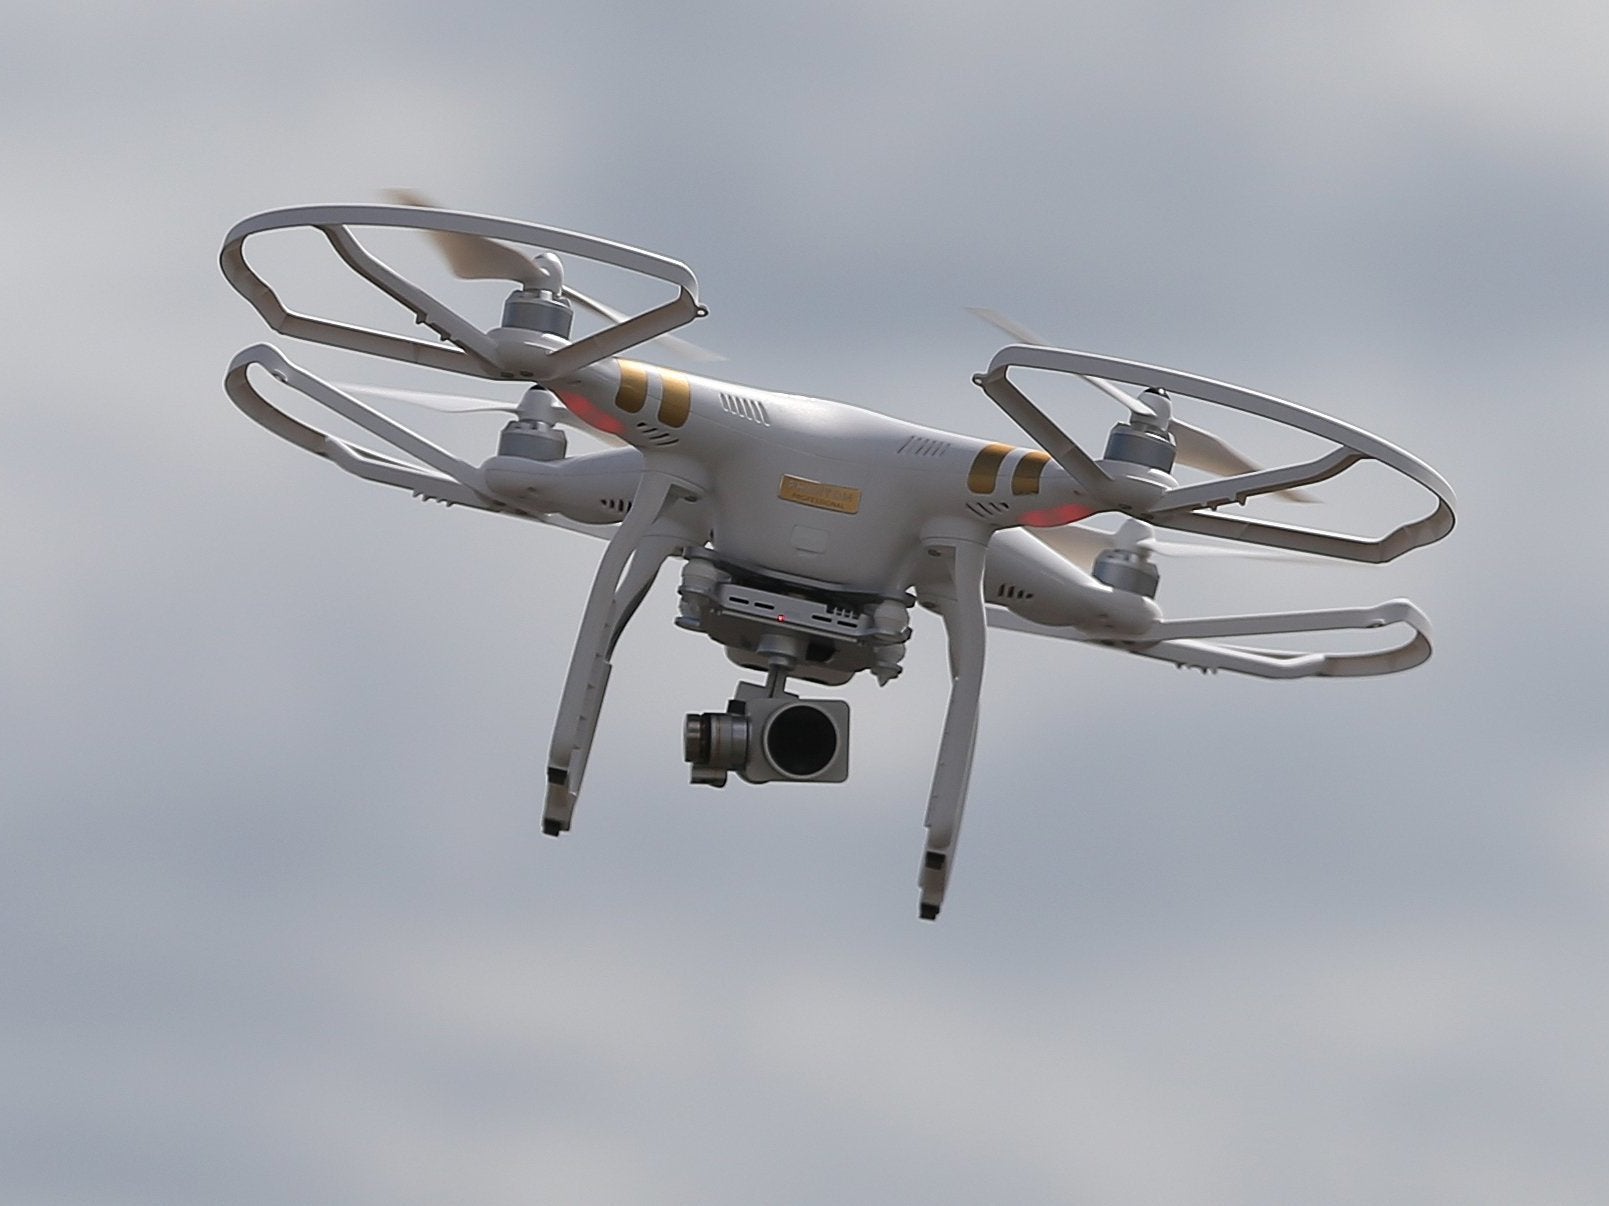 Plane almost had 'potentially fatal' collision with drone near UK airport